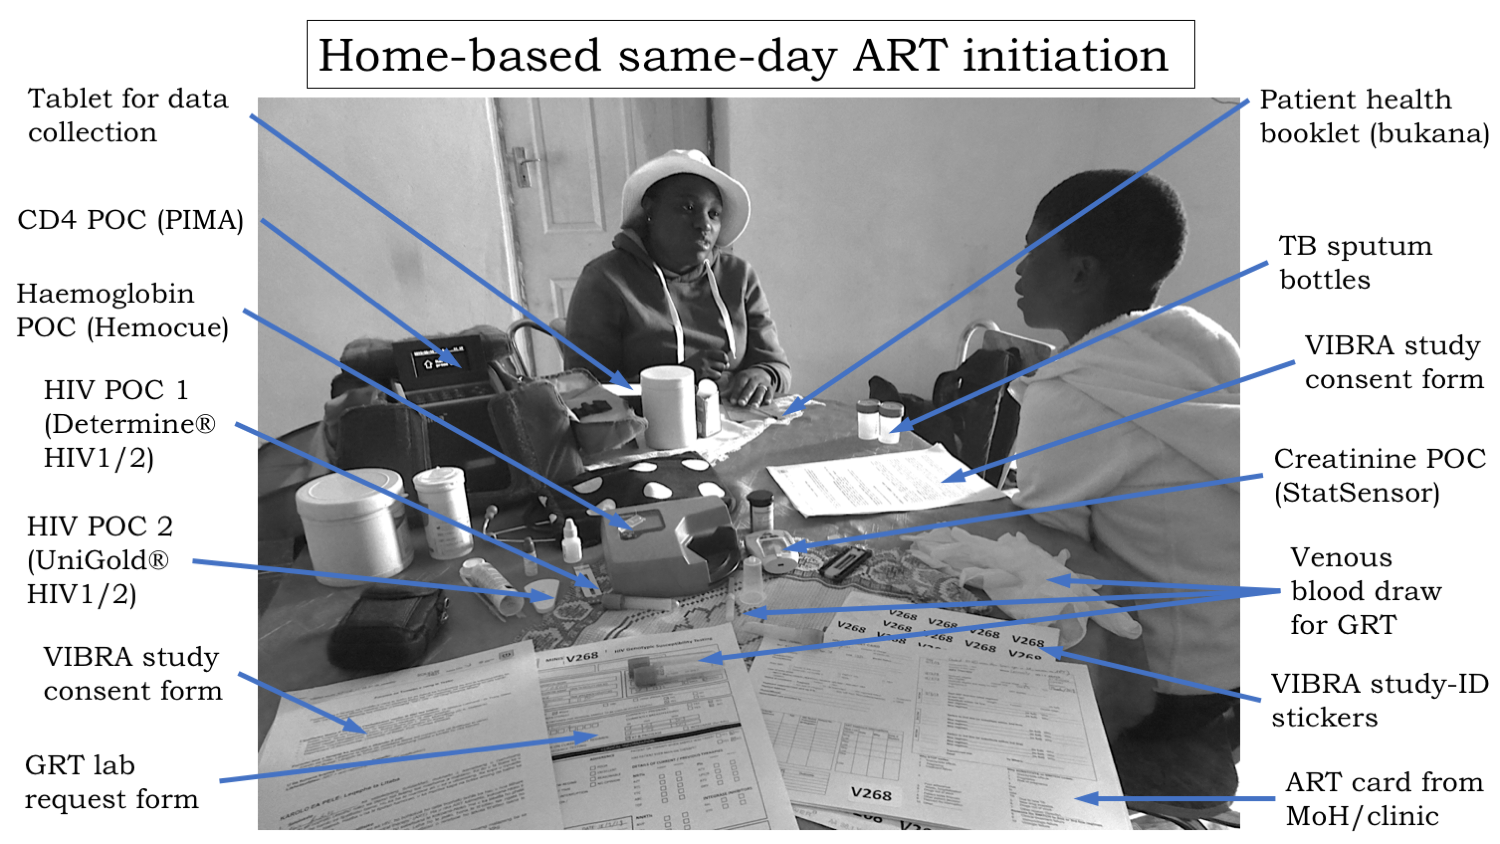 Home-based same-day ART initiation